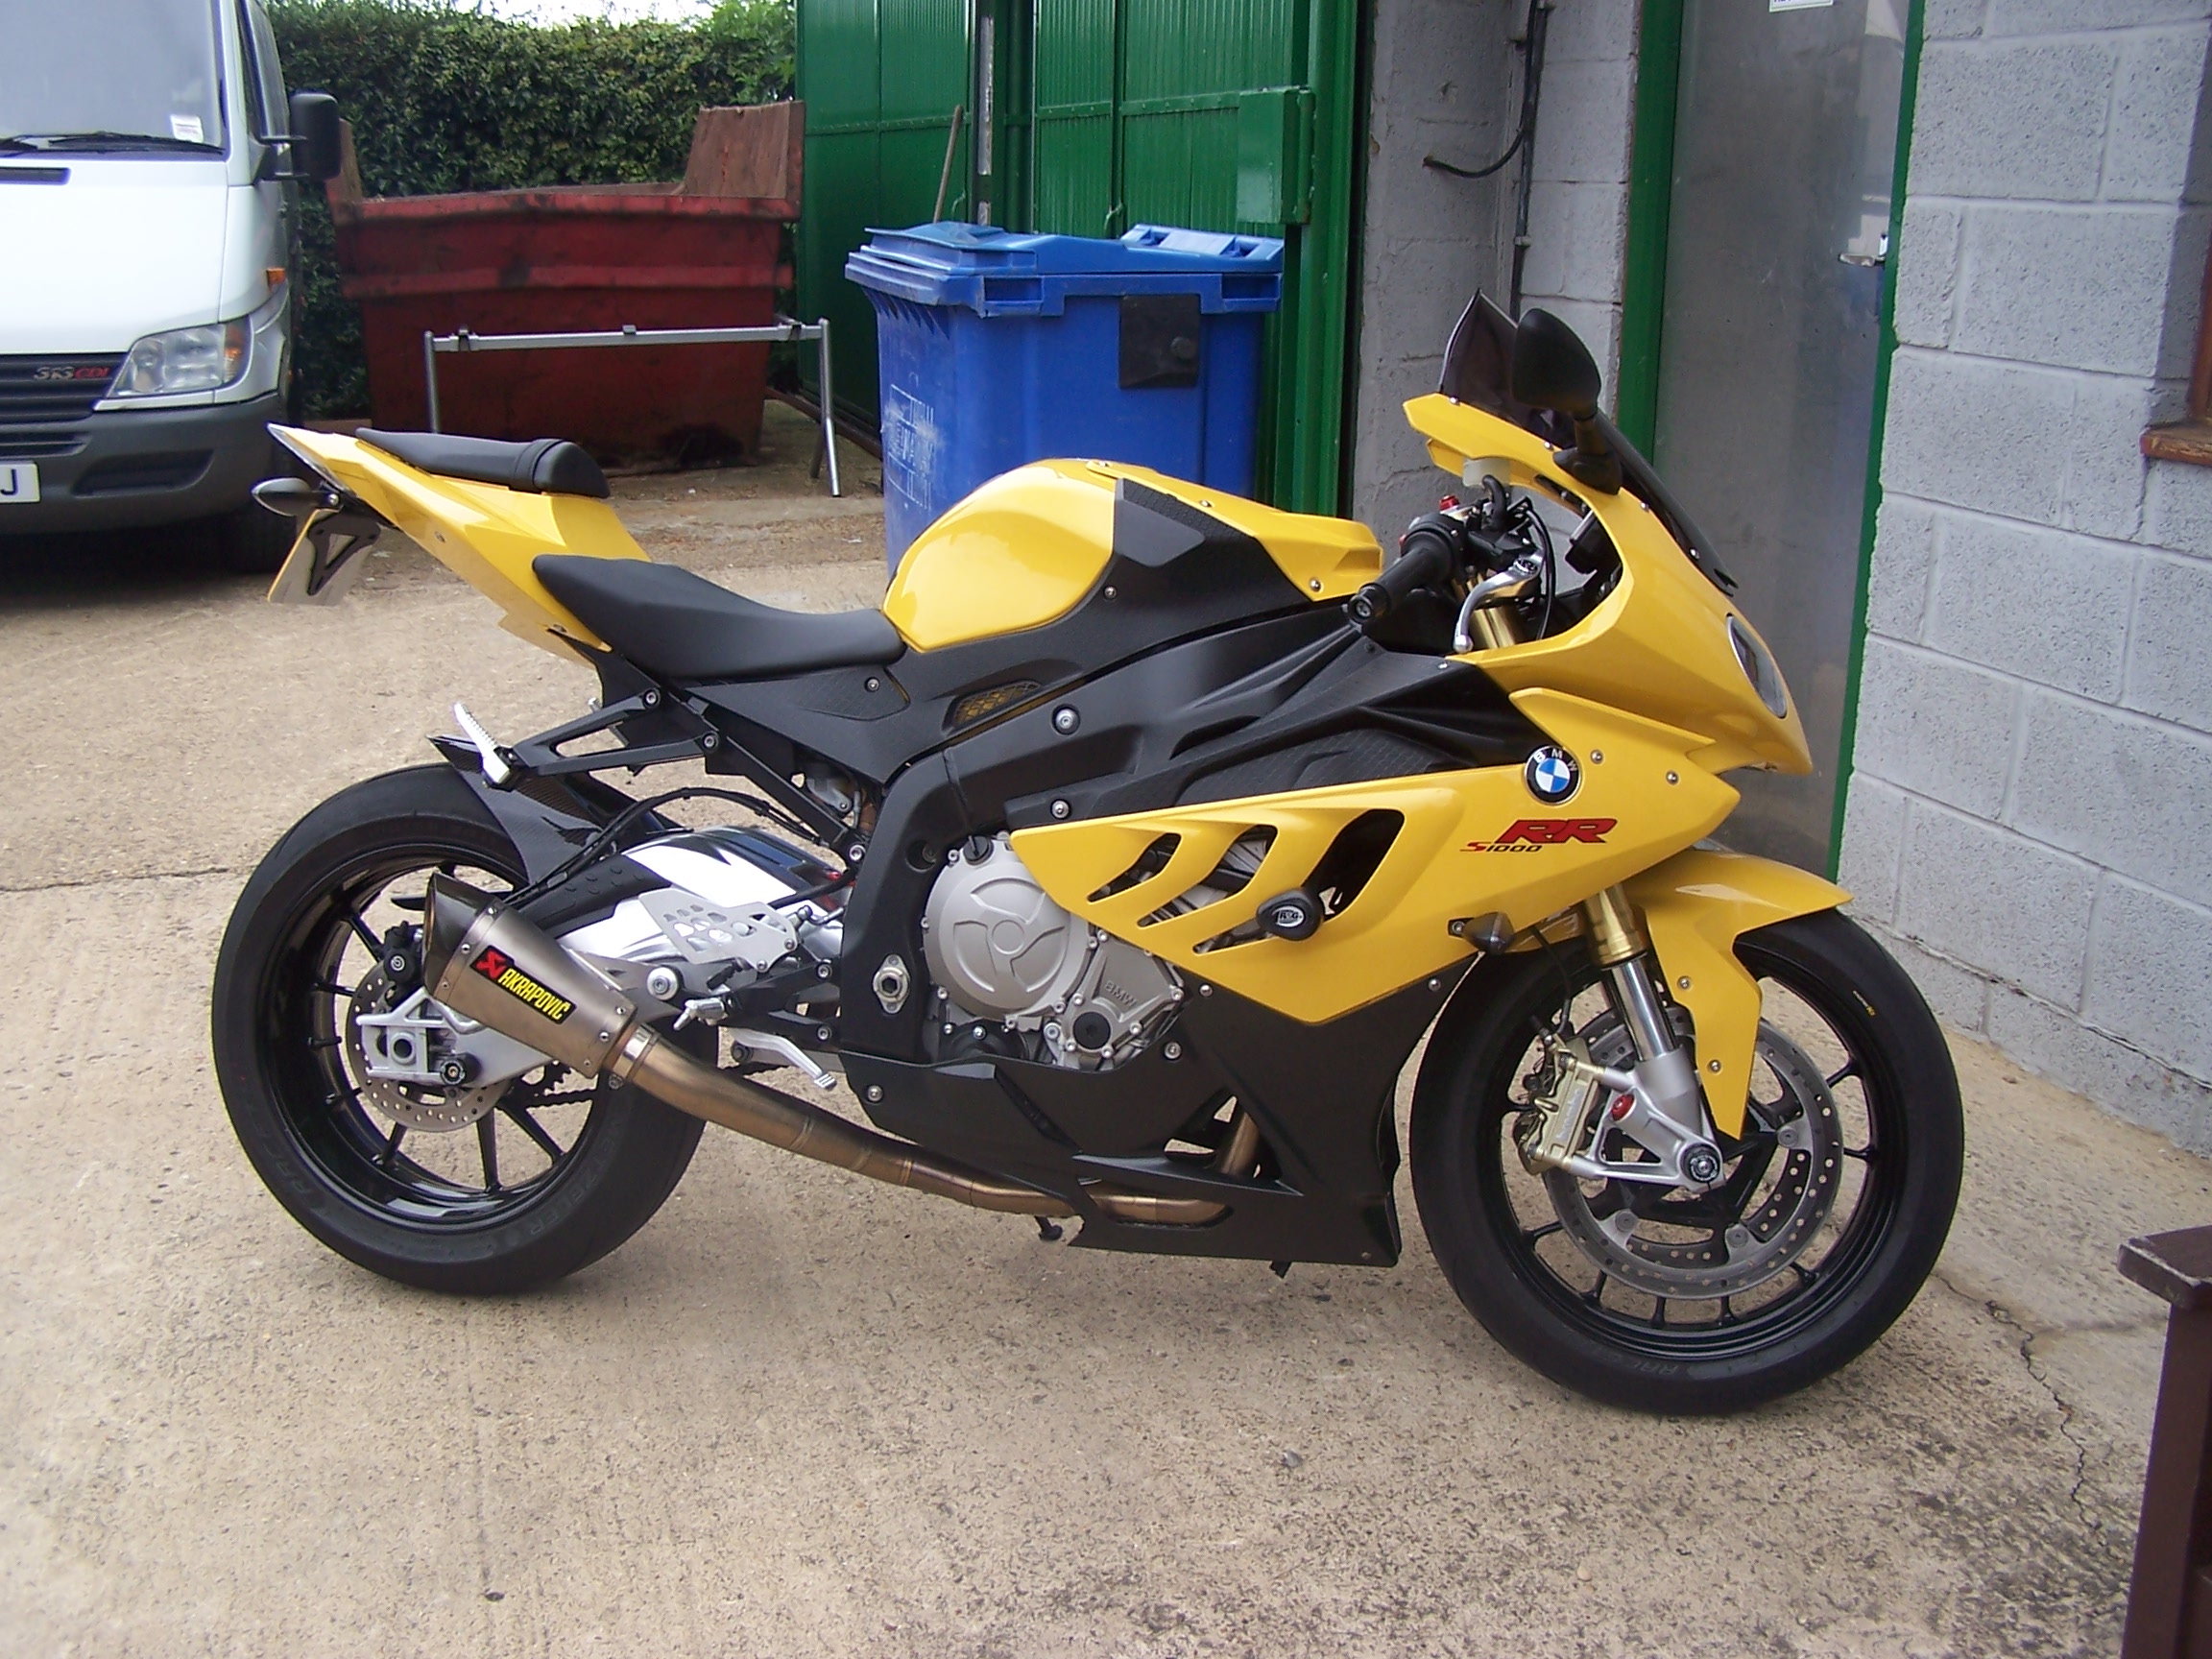 BMW S1000RR ECU remap to suit Akrapovic exhaust and K&N filter